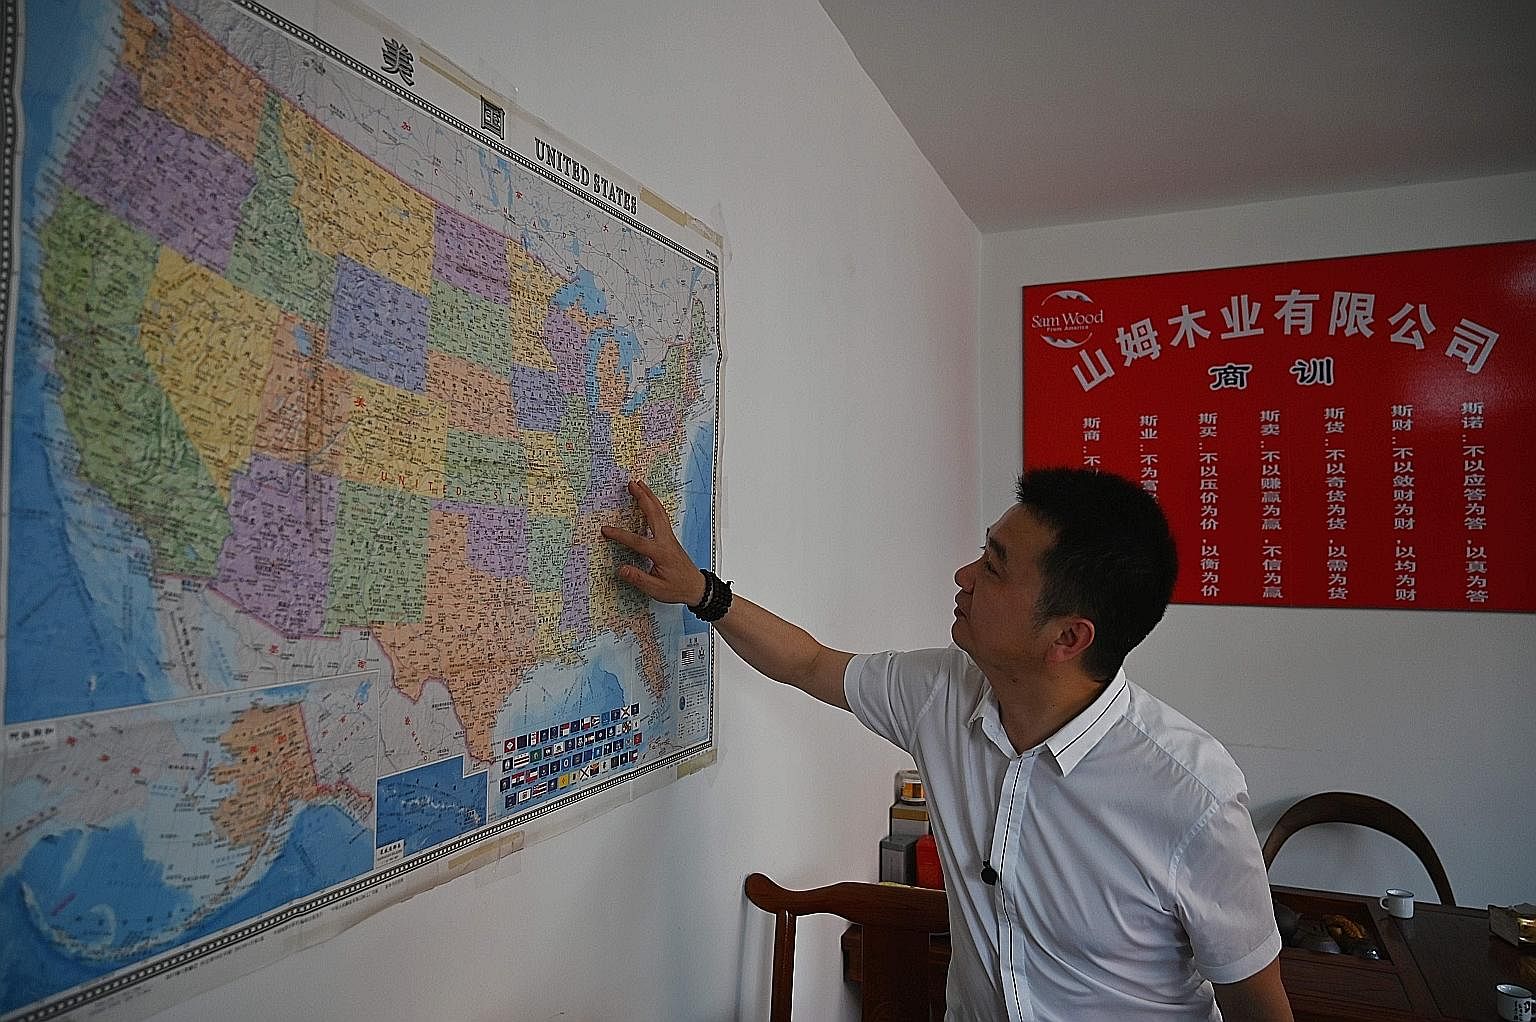 Mr Xu Xuebing, founder of China firm Sam Wood, showing where in the United States his company imports wood from. While China is ahead in some crucial areas, such as artificial intelligence, it is behind and dependent on foreign sources - especially t